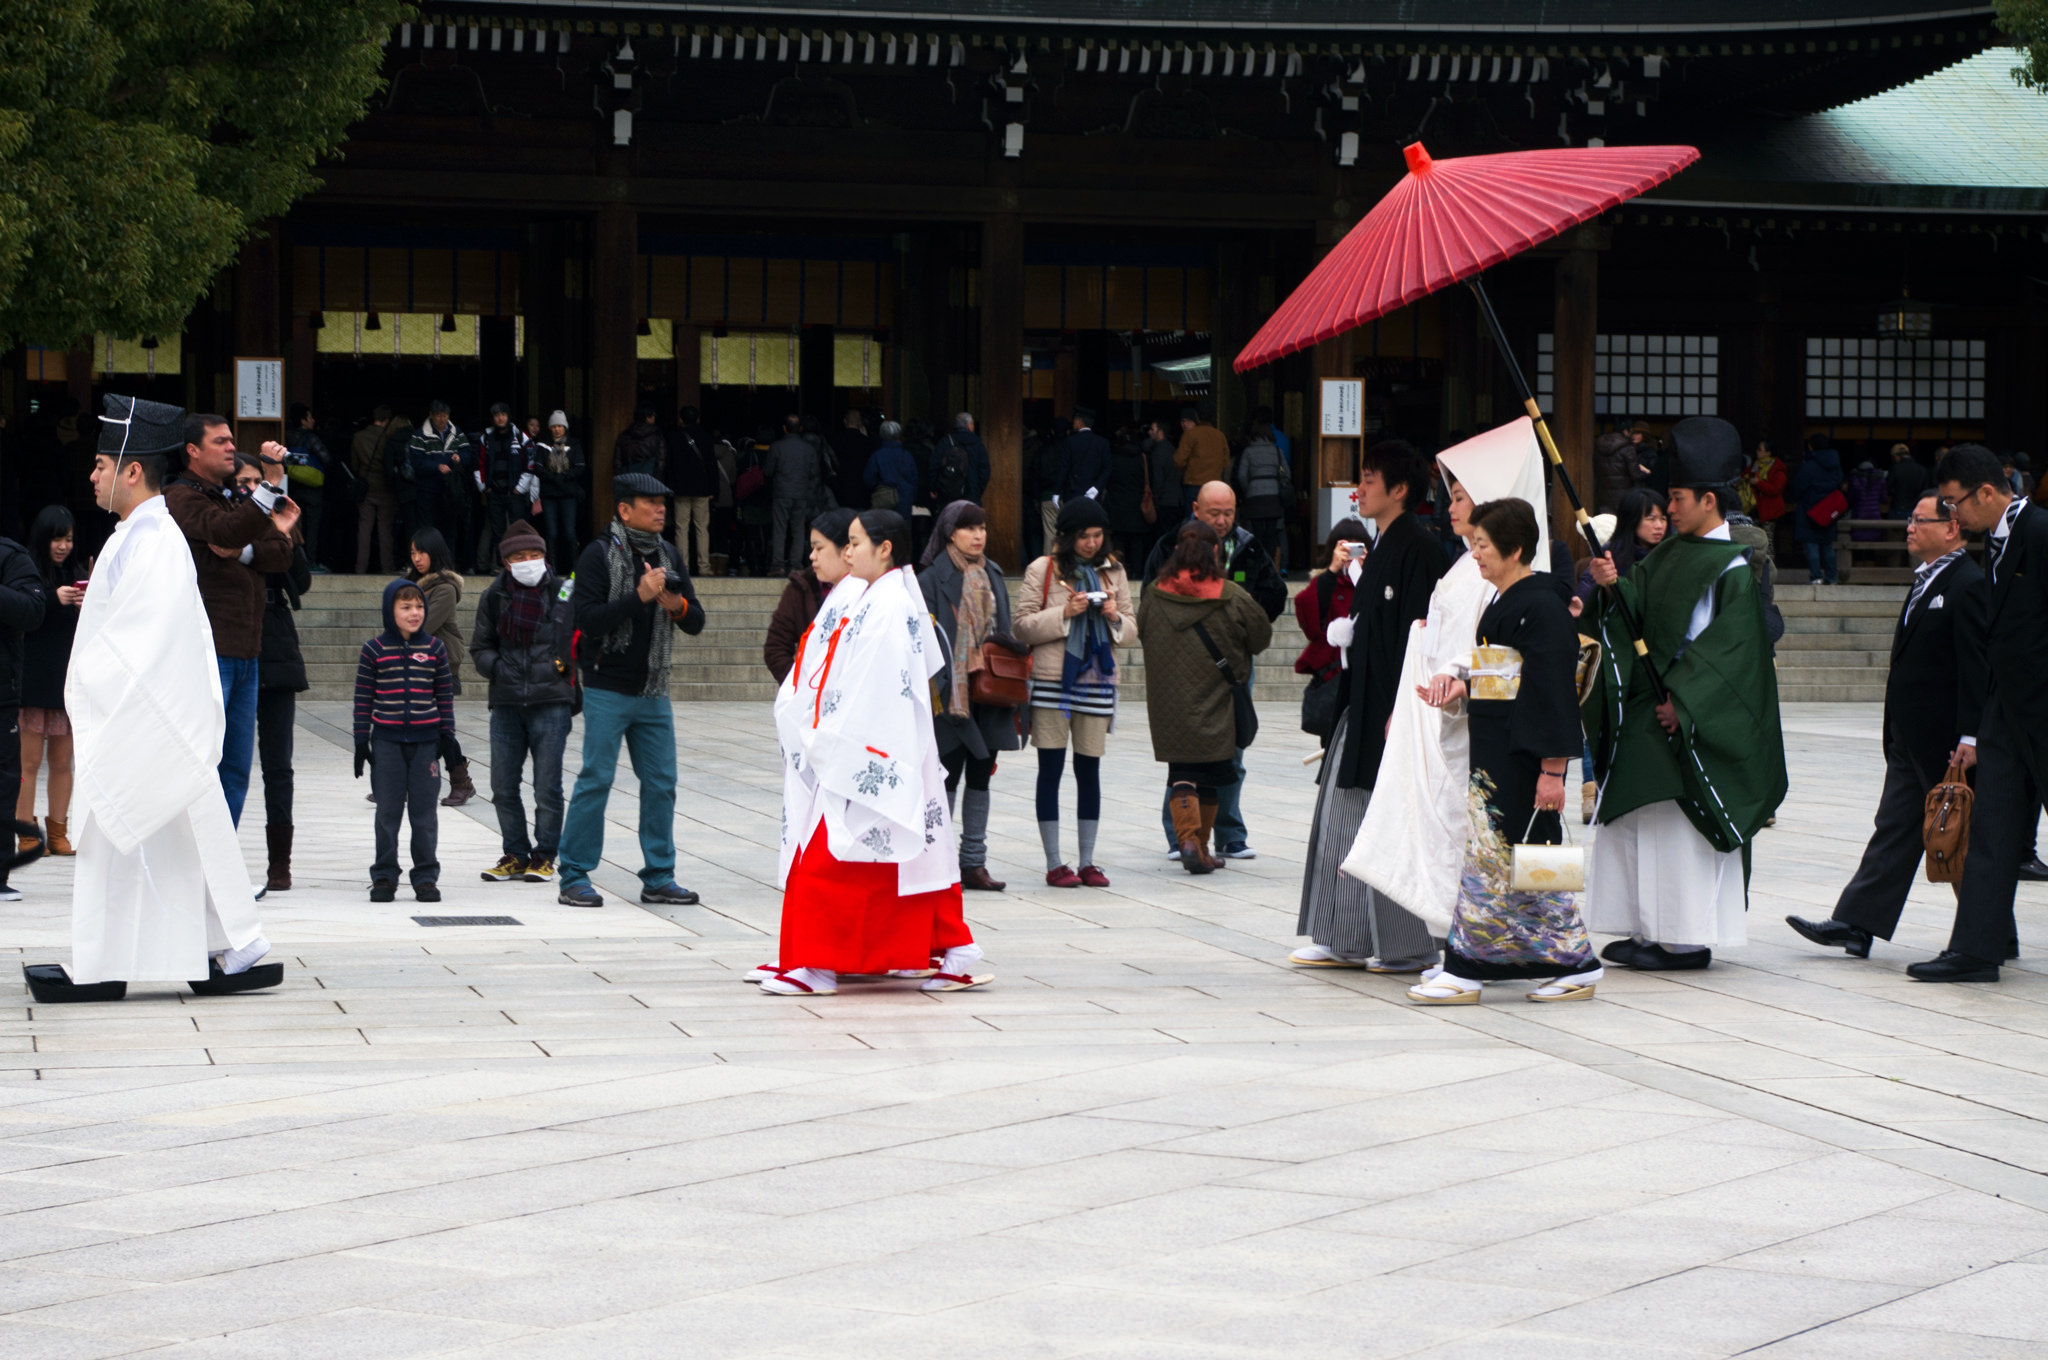 Traditional Japanese wedding ceremony at the Meiji Shrine in Tokyo.